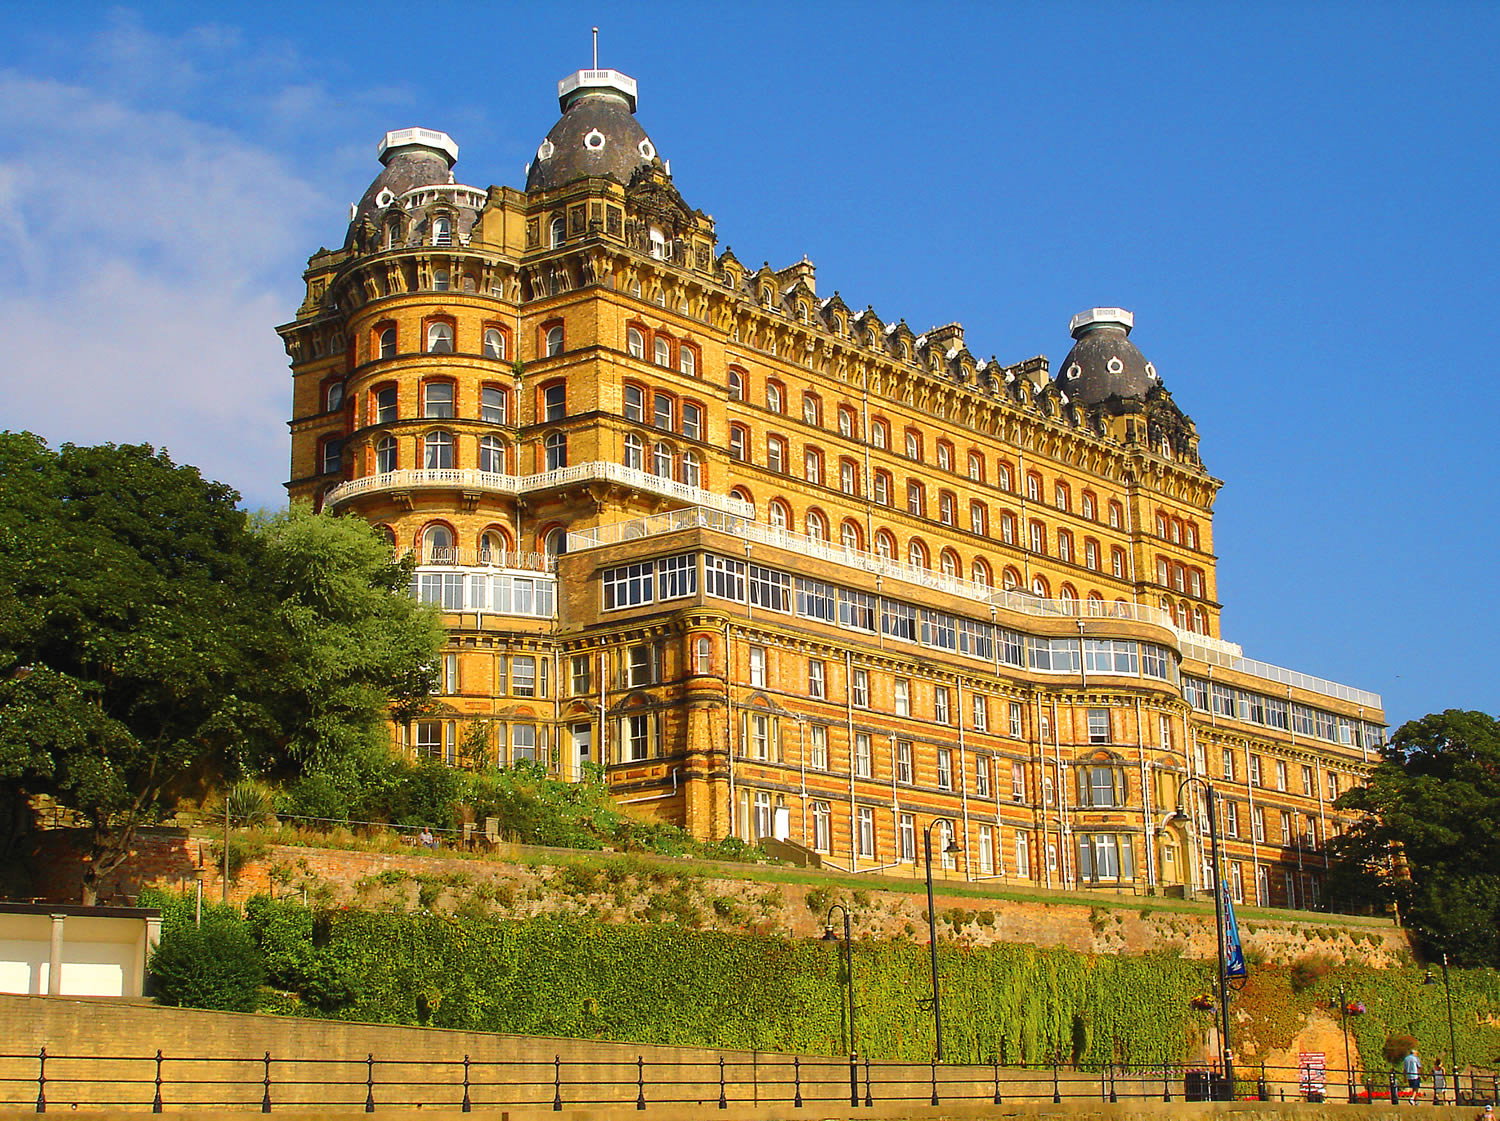 Image name The Grand Hotel the 1 image from the post The Grand Hotel, Scarborough in Yorkshire.com.